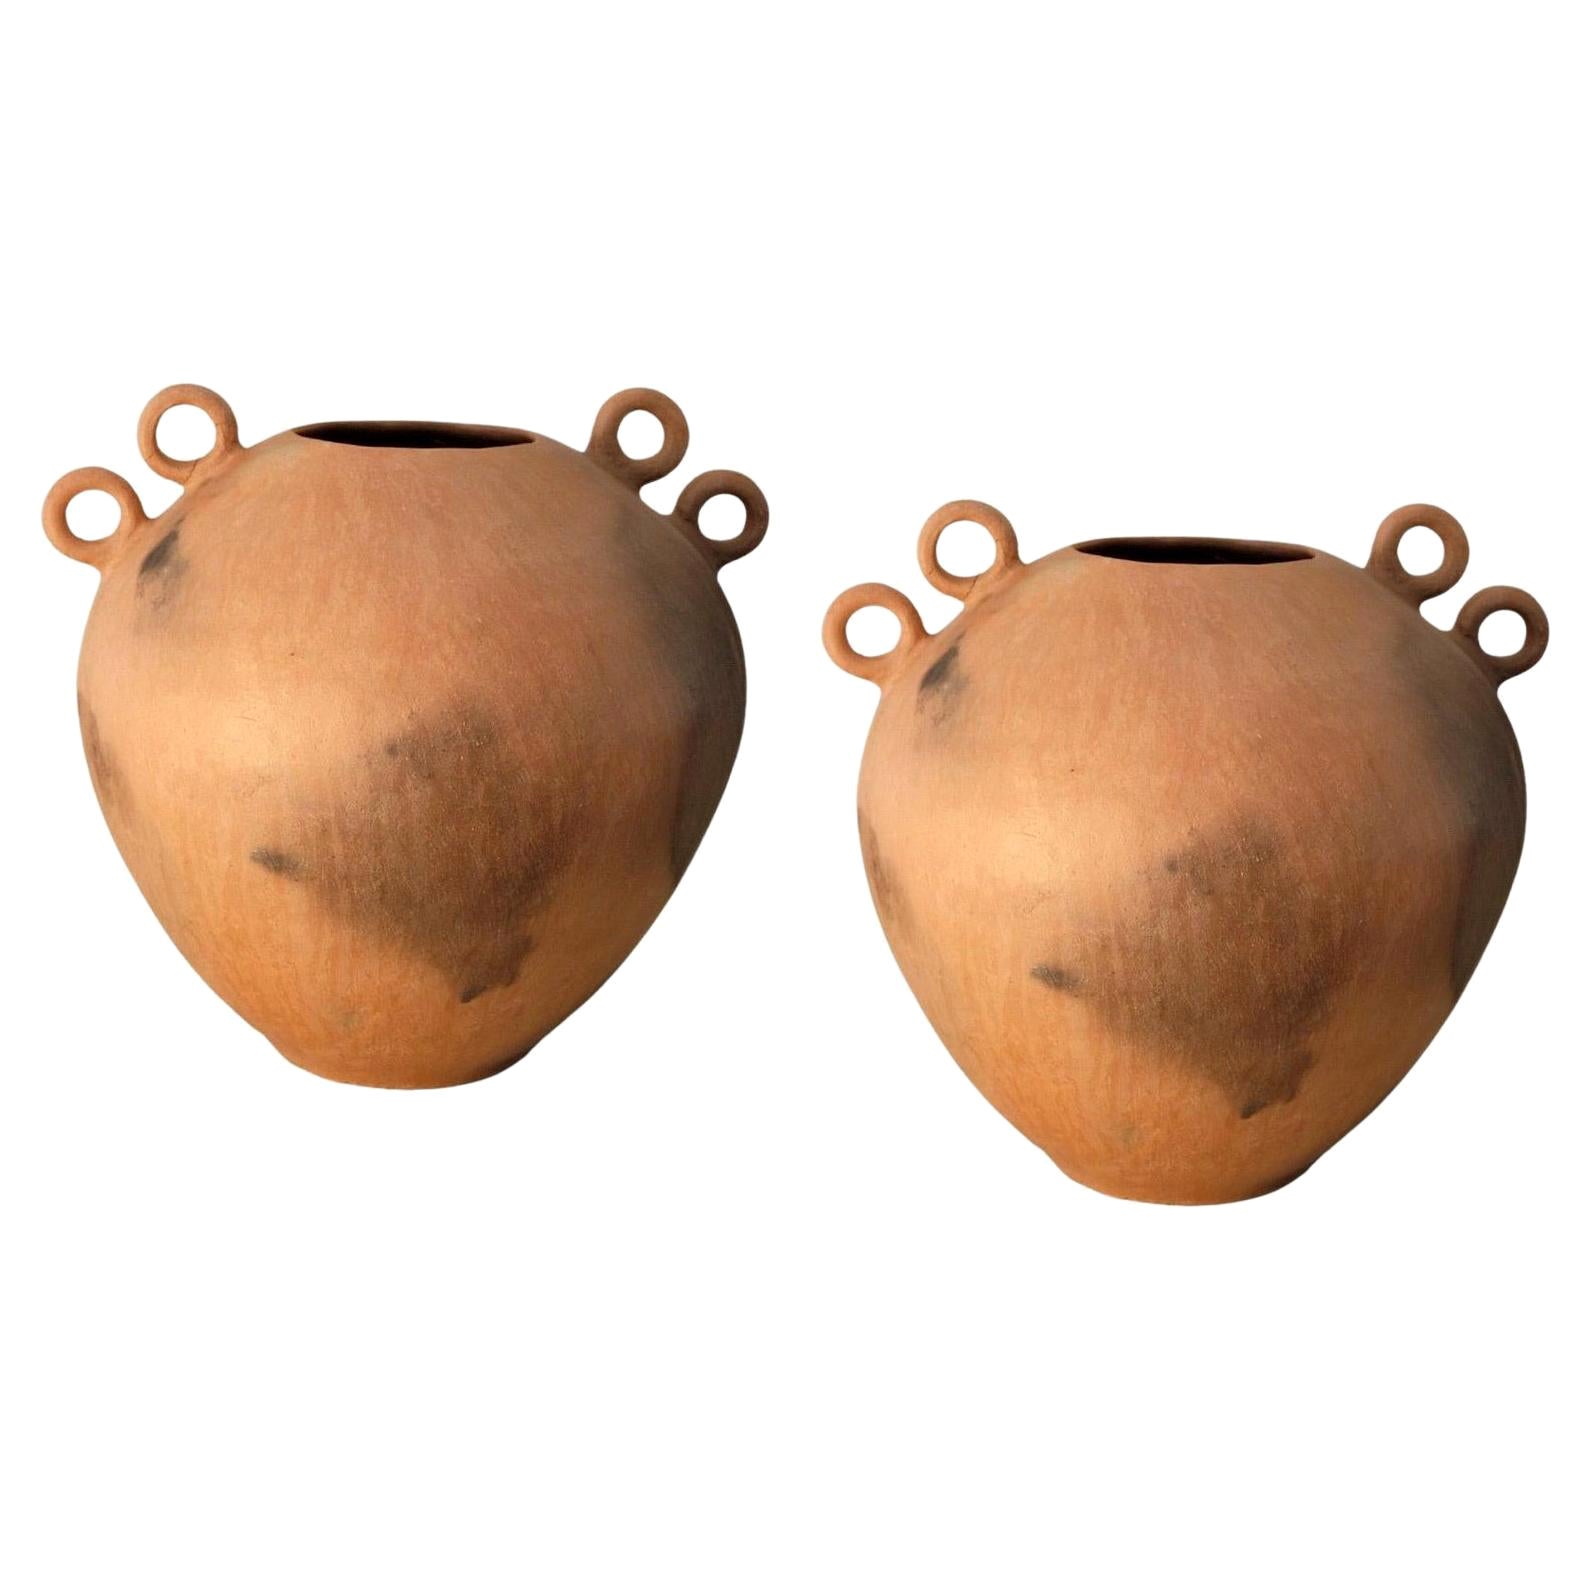 Pair of Tierra Caliente Vases by Onora For Sale